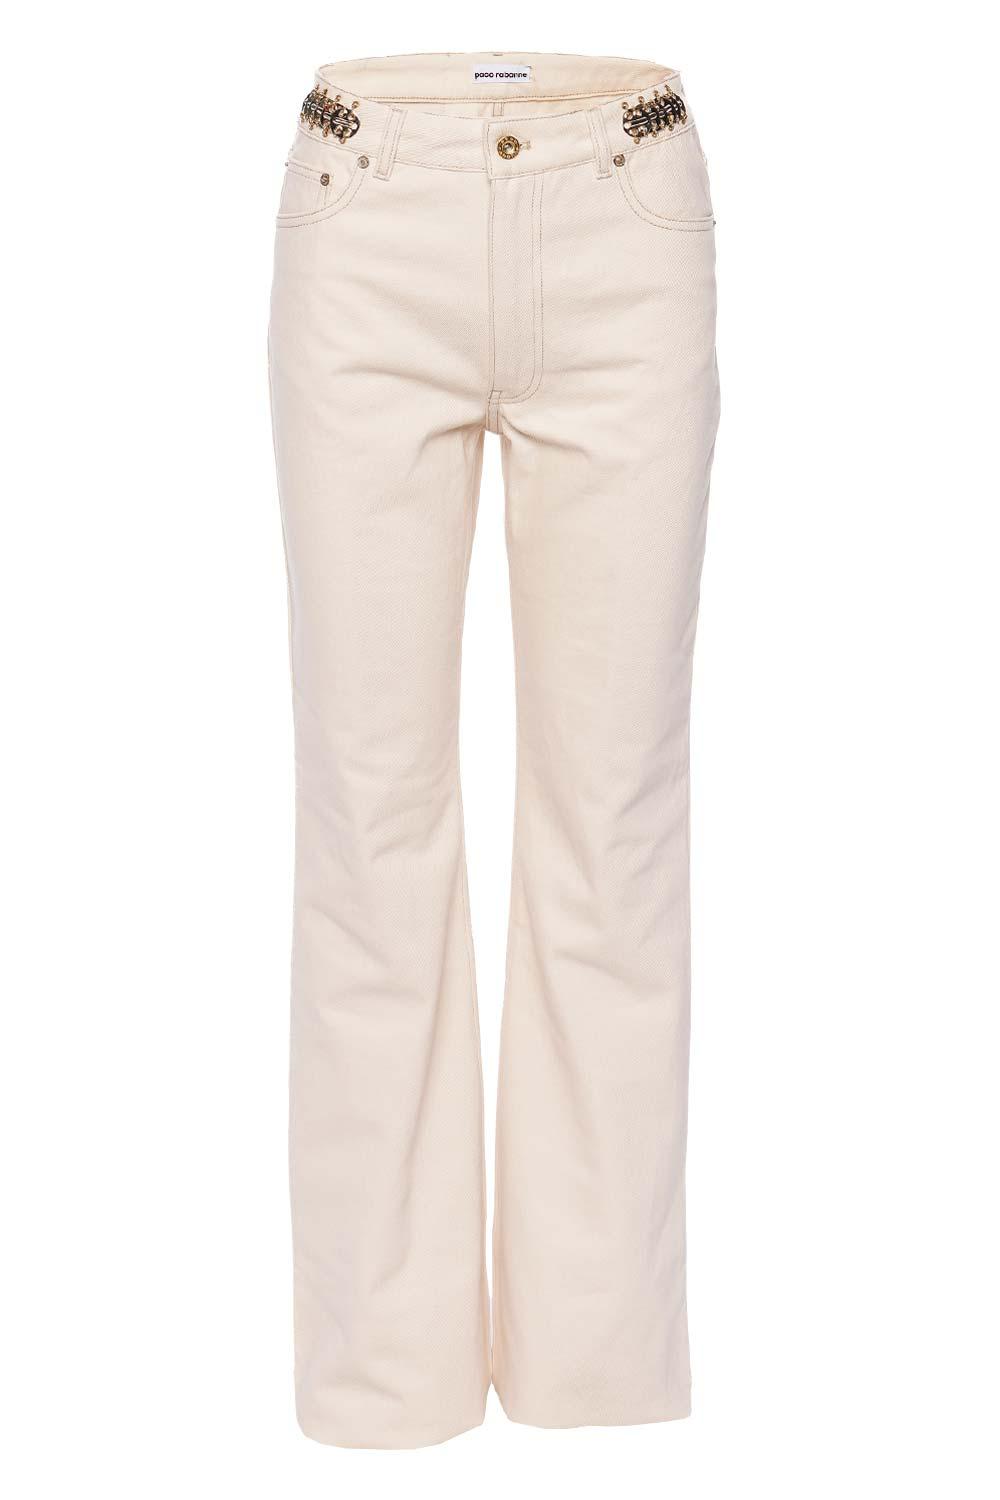 Paco Rabanne Off White Flare Embellished Denim Jeans in Natural | Lyst